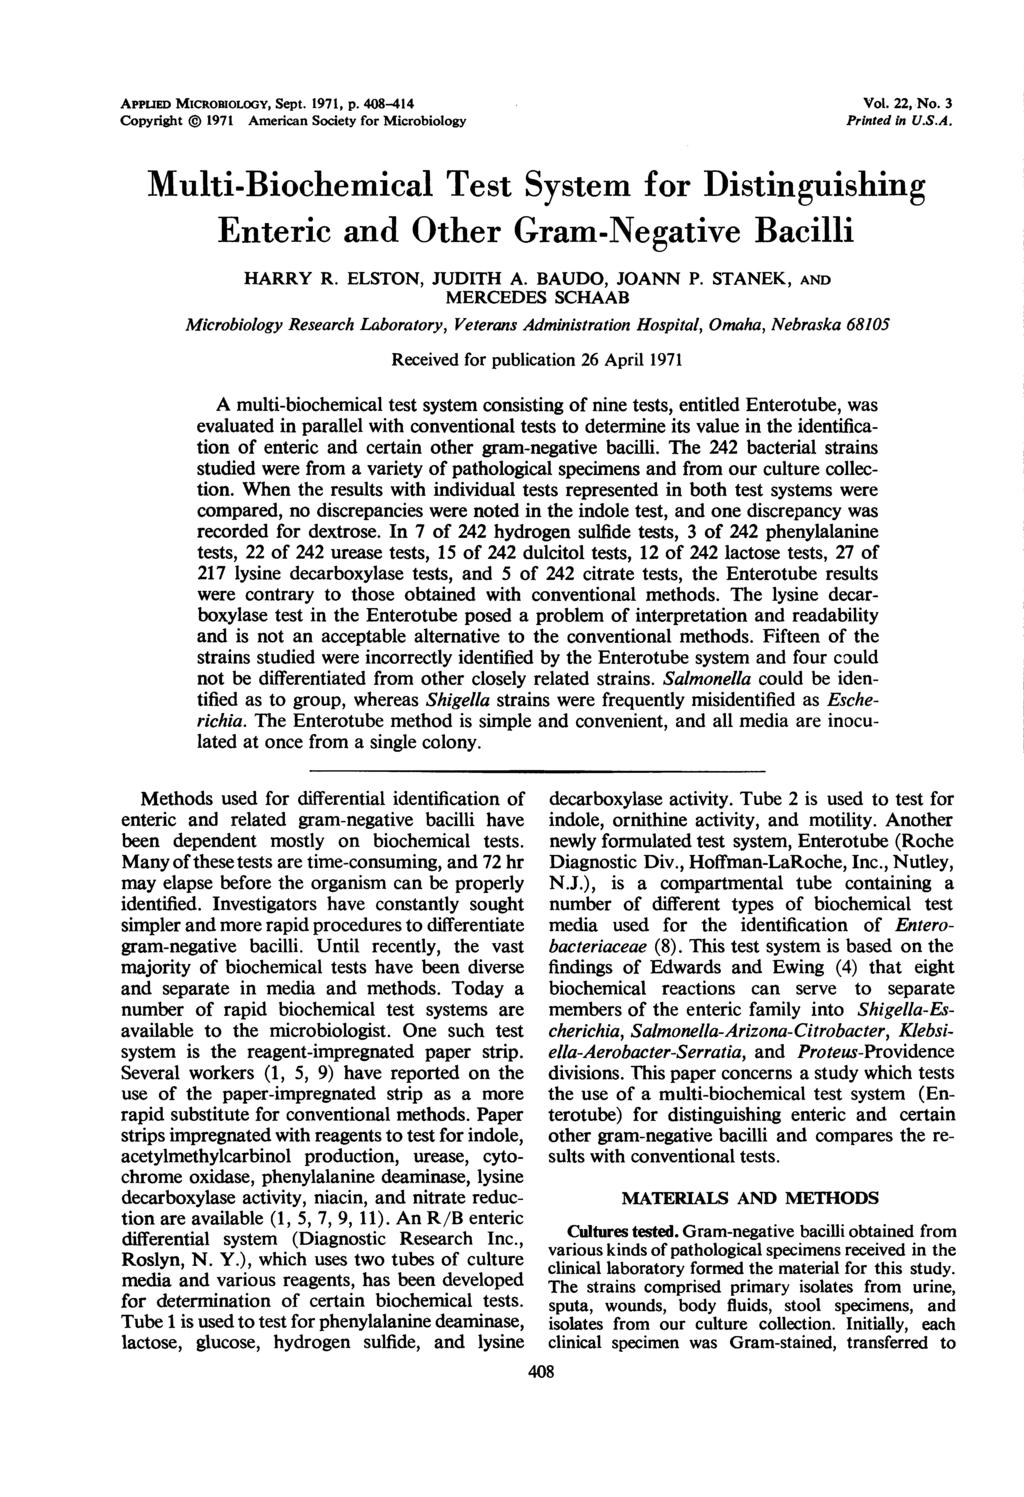 APuPED MICROBIOLOGY, Sept. 1971, p. 8-1 Vol., No. Copyright 1971 American Society for Microbiology Printed in U.S.A. Multi-Biochemical Test System for Distinguishing Enteric and Other Gram-Negative Bacilli HARRY R.